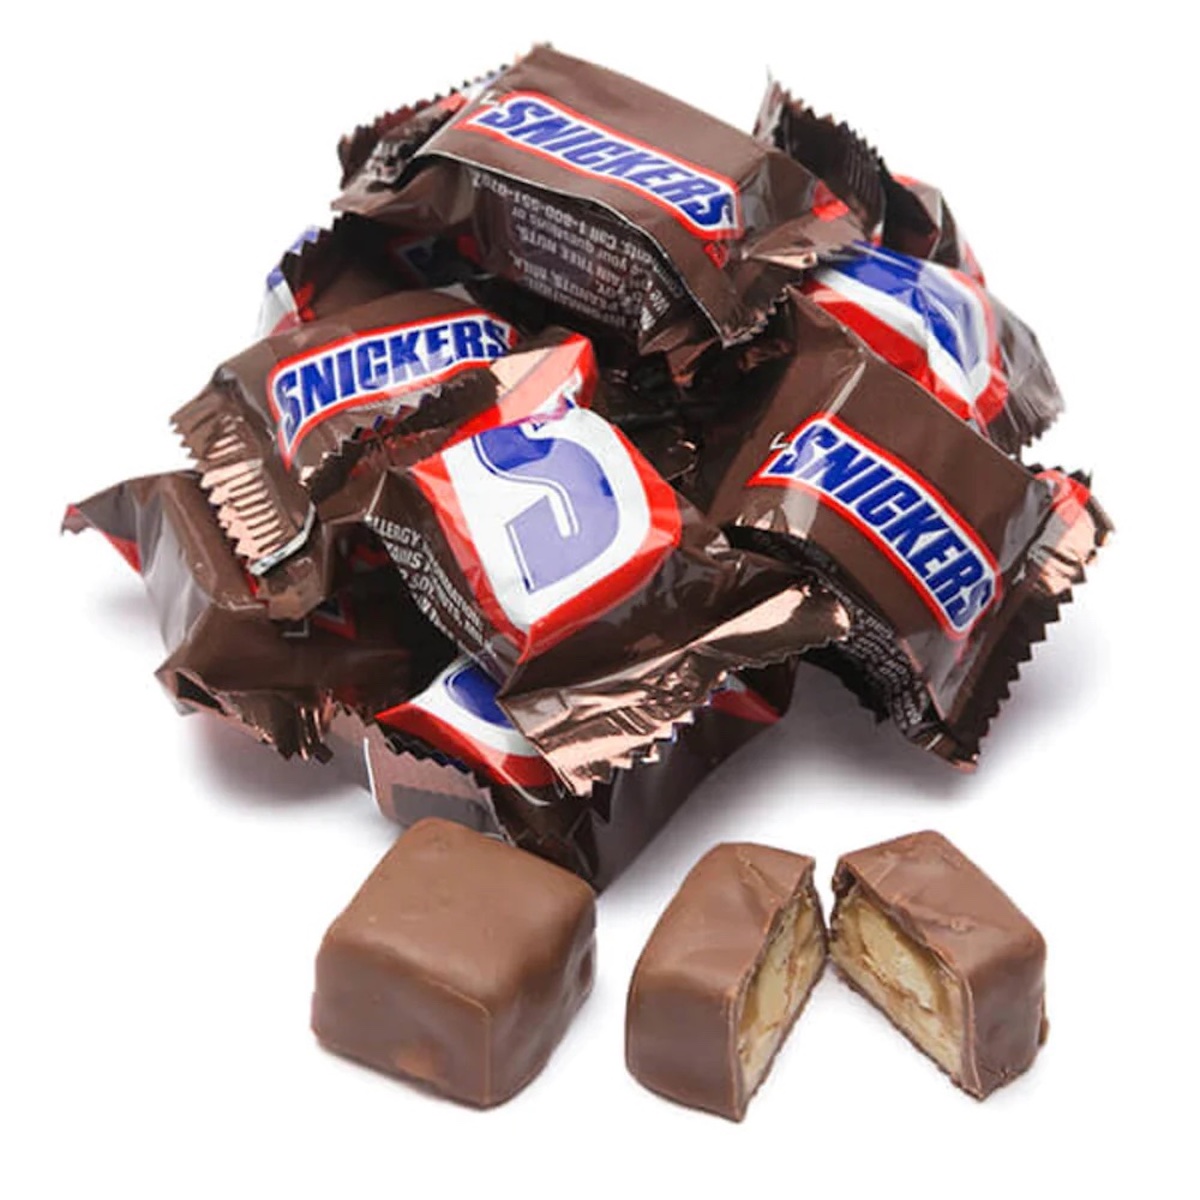 Small snickers bars in a pile